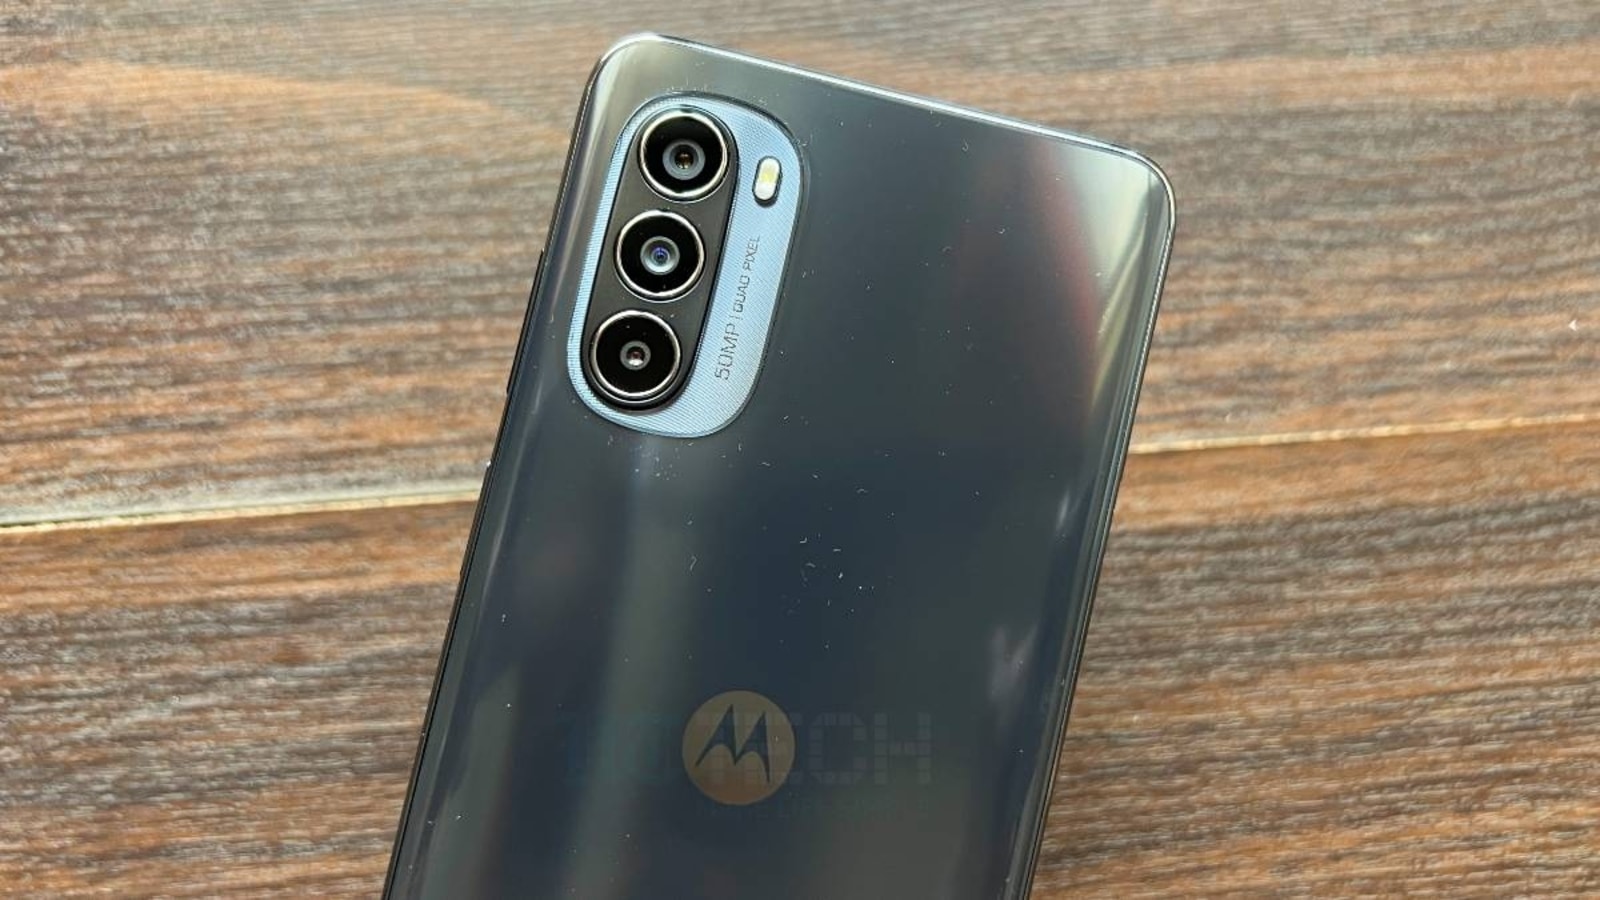 New Moto G 5G unveiled with Snapdragon 480+ and lower price tag